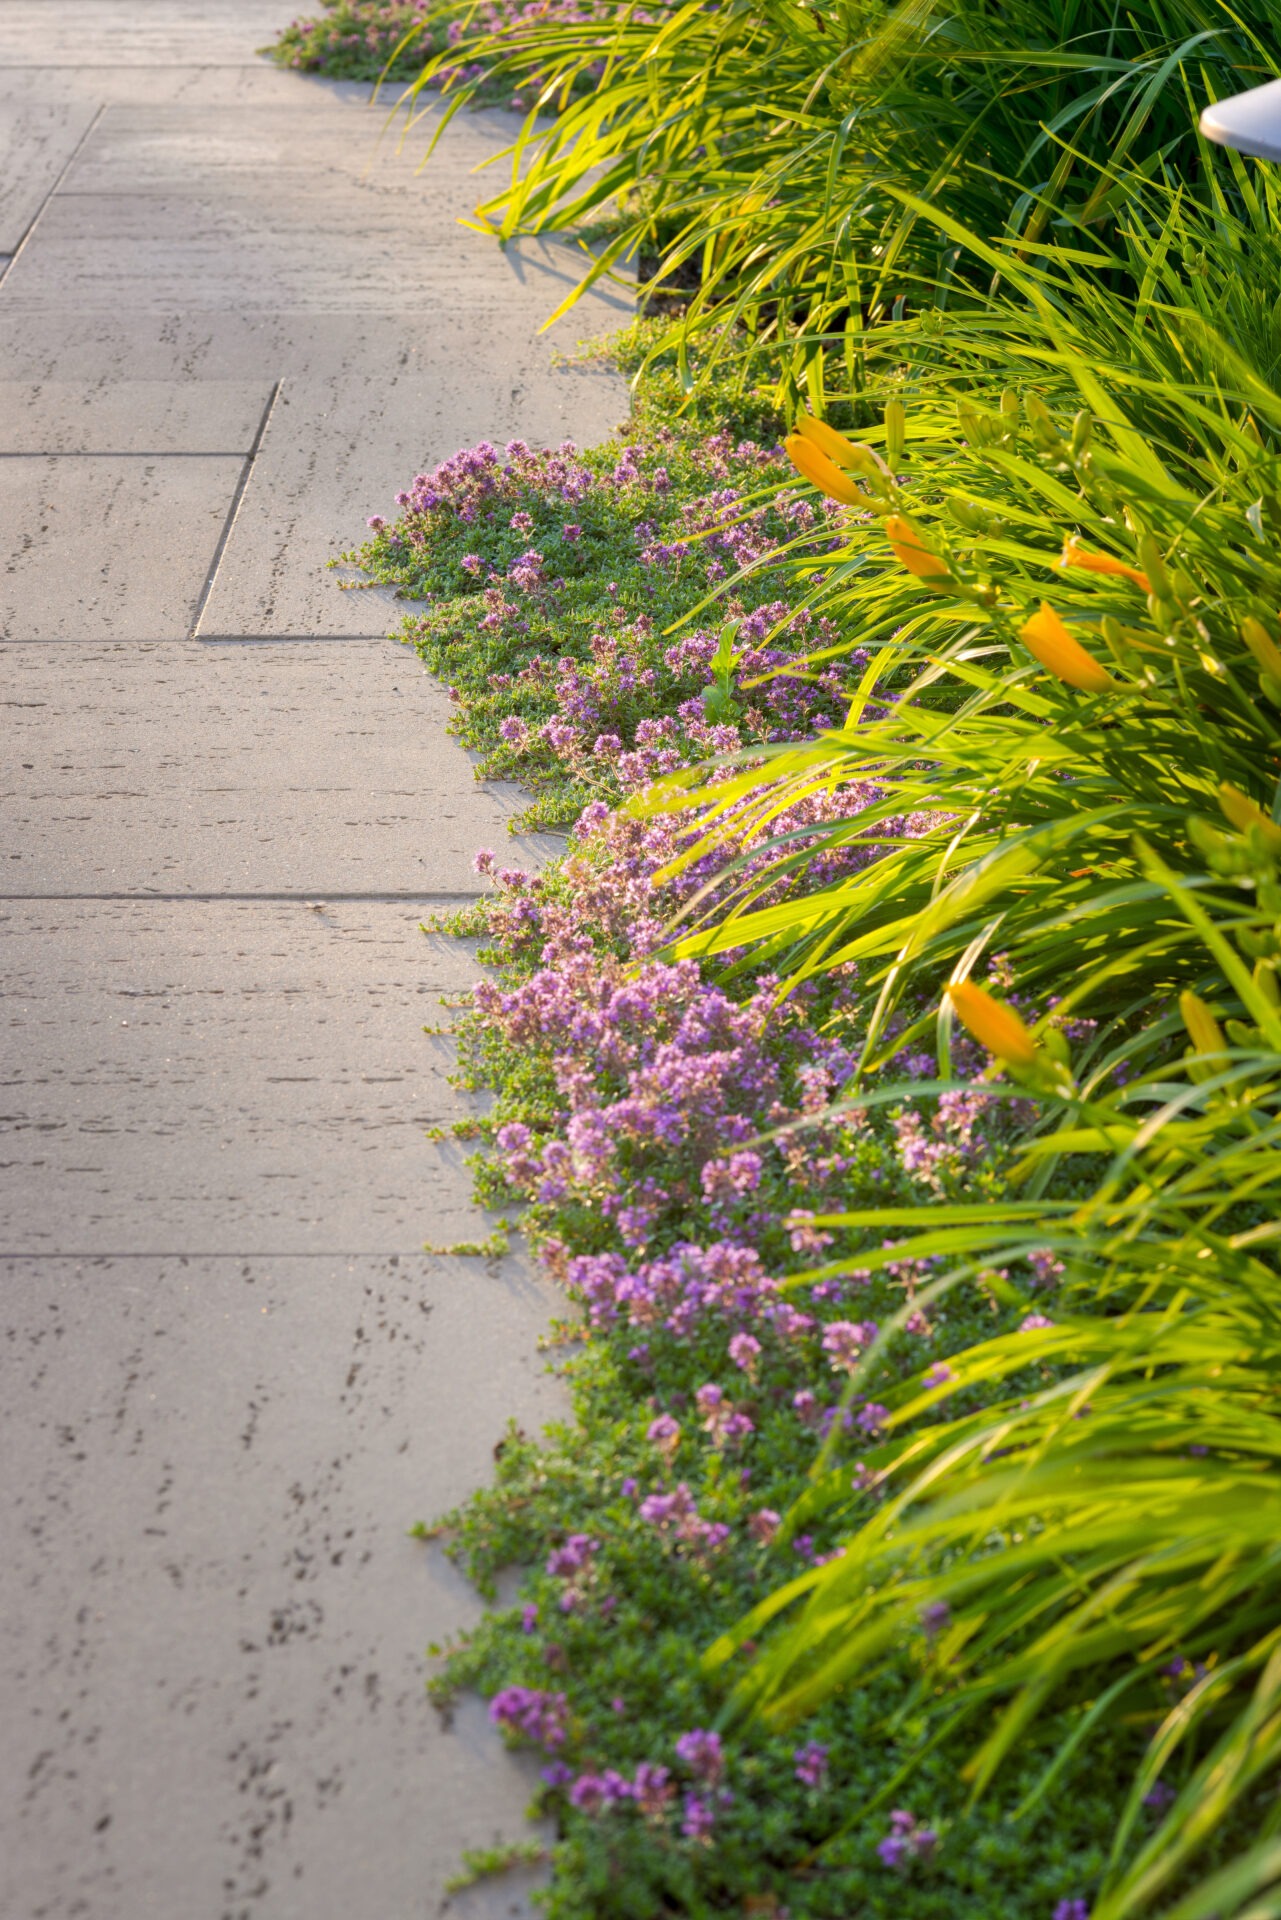 A concrete pathway is lined with lush greenery, vibrant yellow flowers, and soft purple blooms in a tranquil, sunlit garden setting.